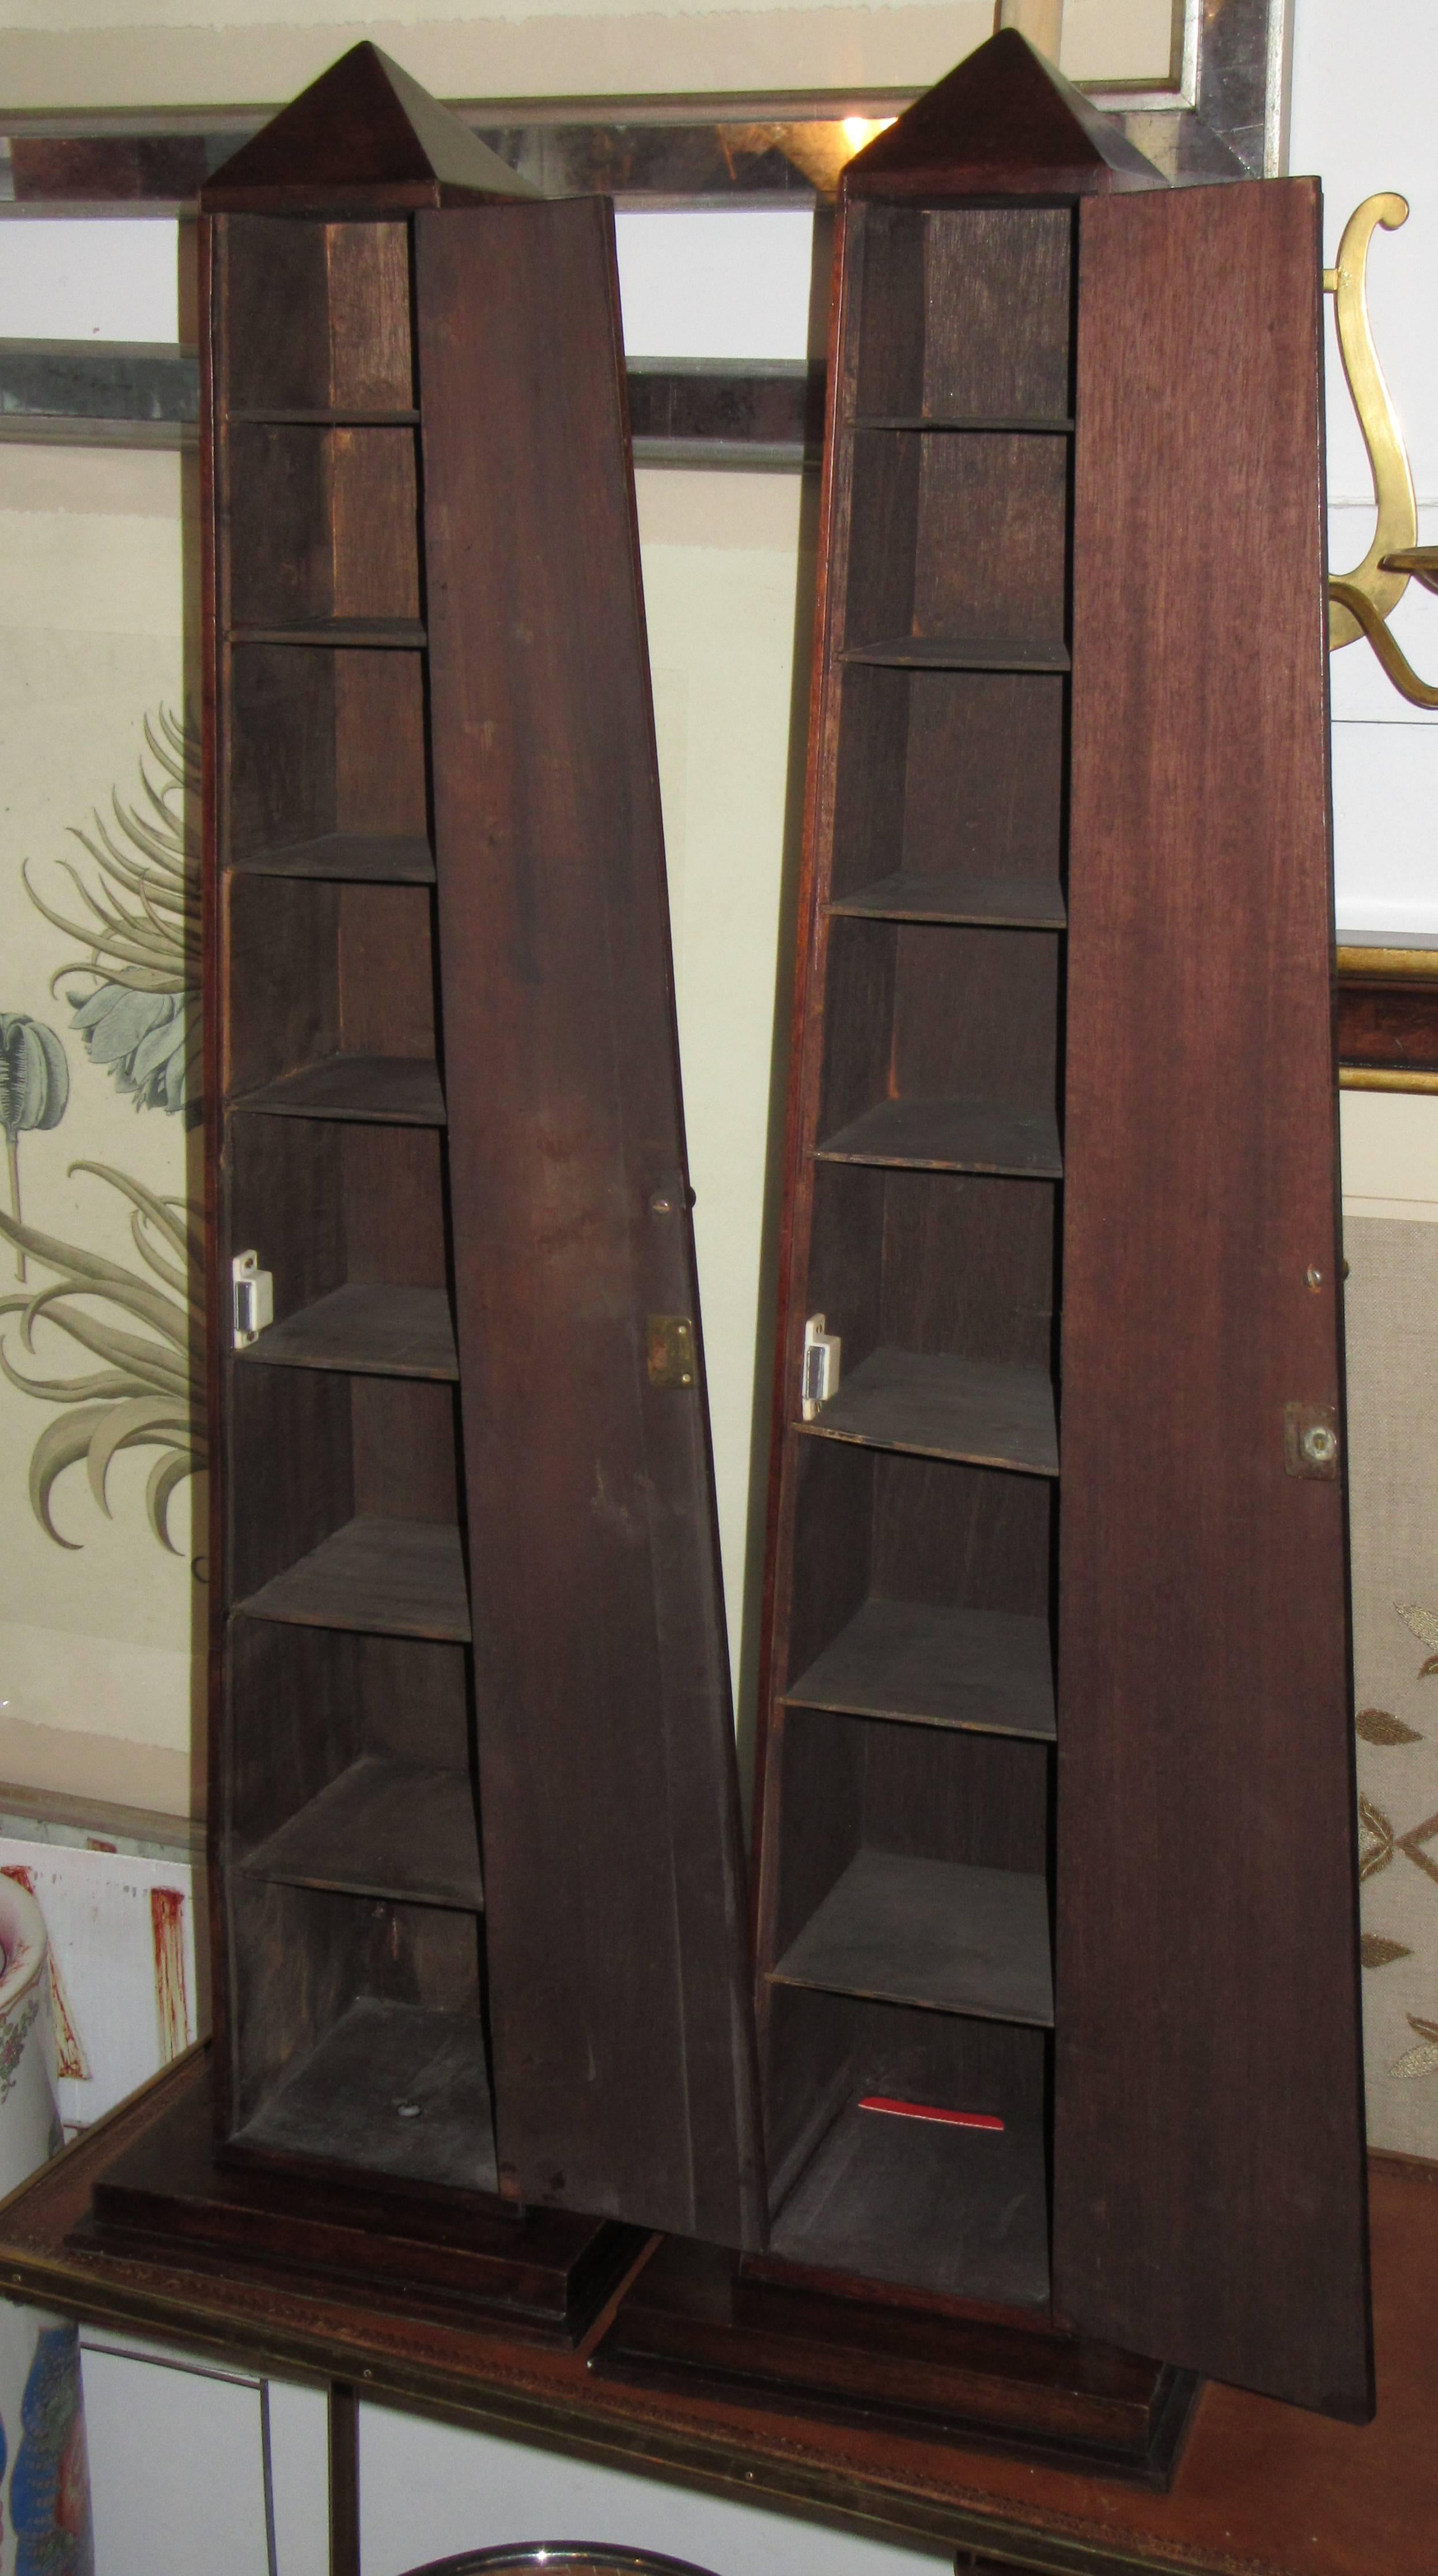 A pair of mahogany obelisks on platforms. One side opens to reveal graduated shelves.